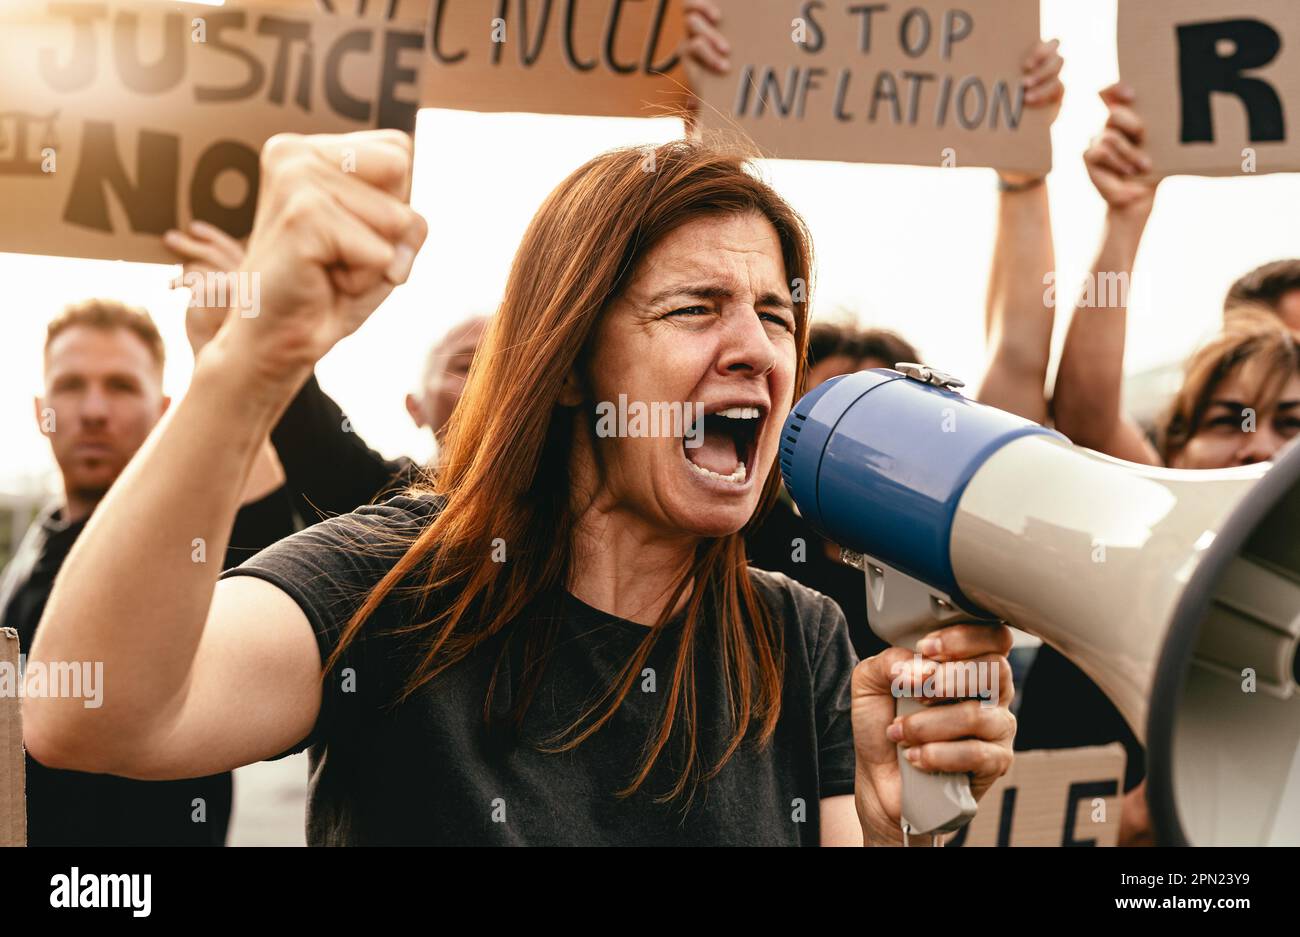 People protesting against financial crisis and global inflation - Economic justice activism concept Stock Photo